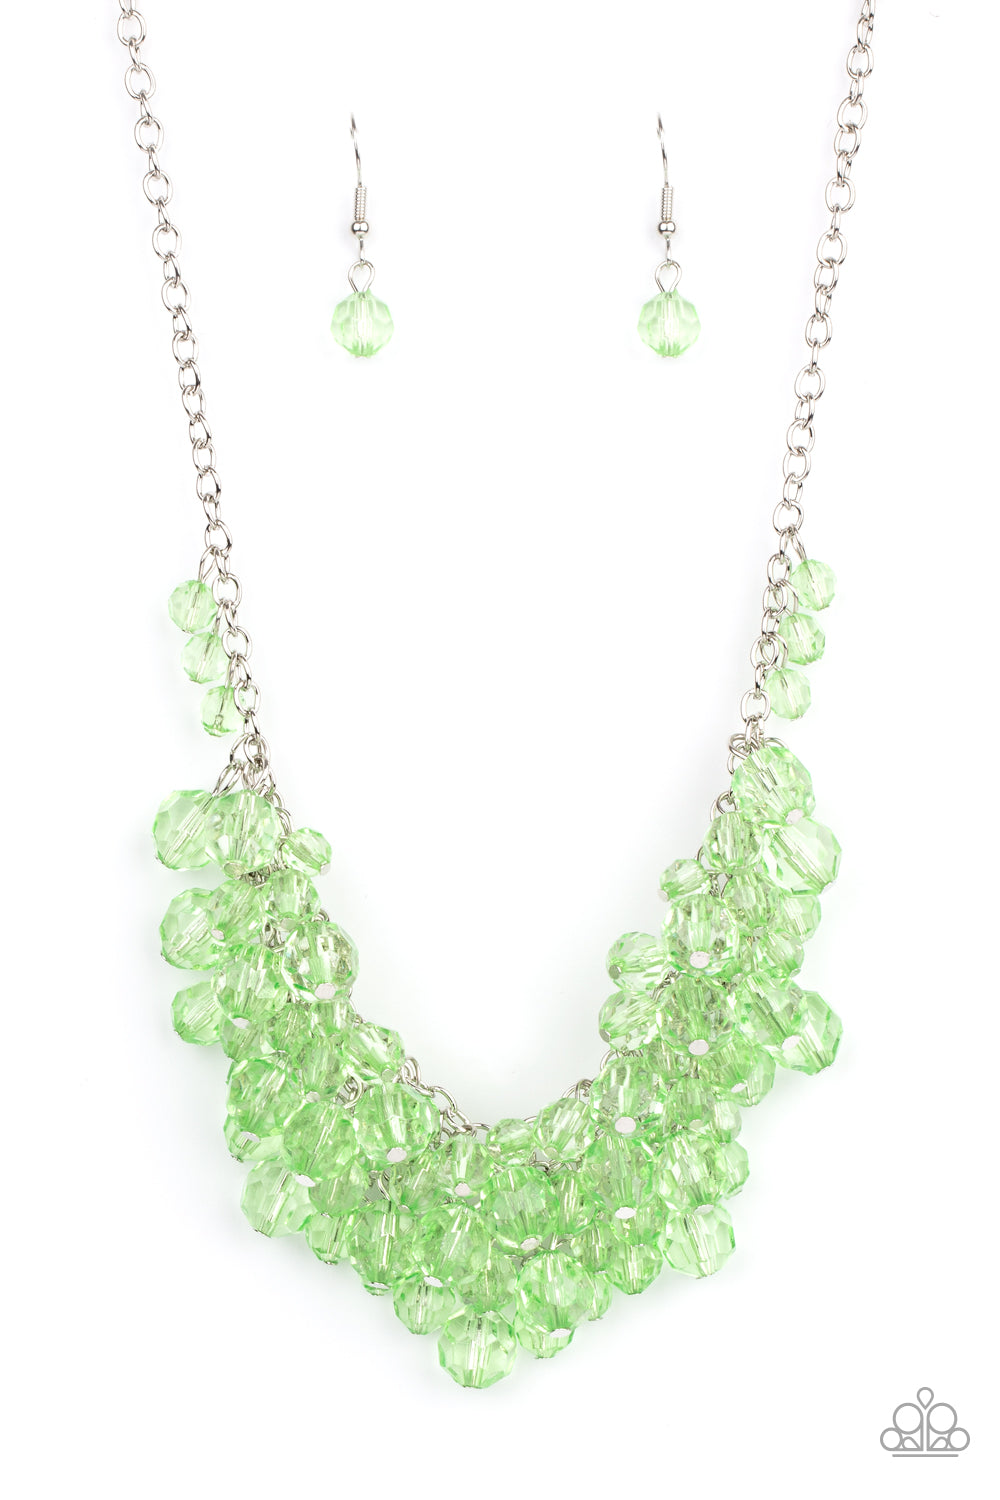 Paparazzi Let The Festivities Begin - Green Necklace - paparazzi jewelry images